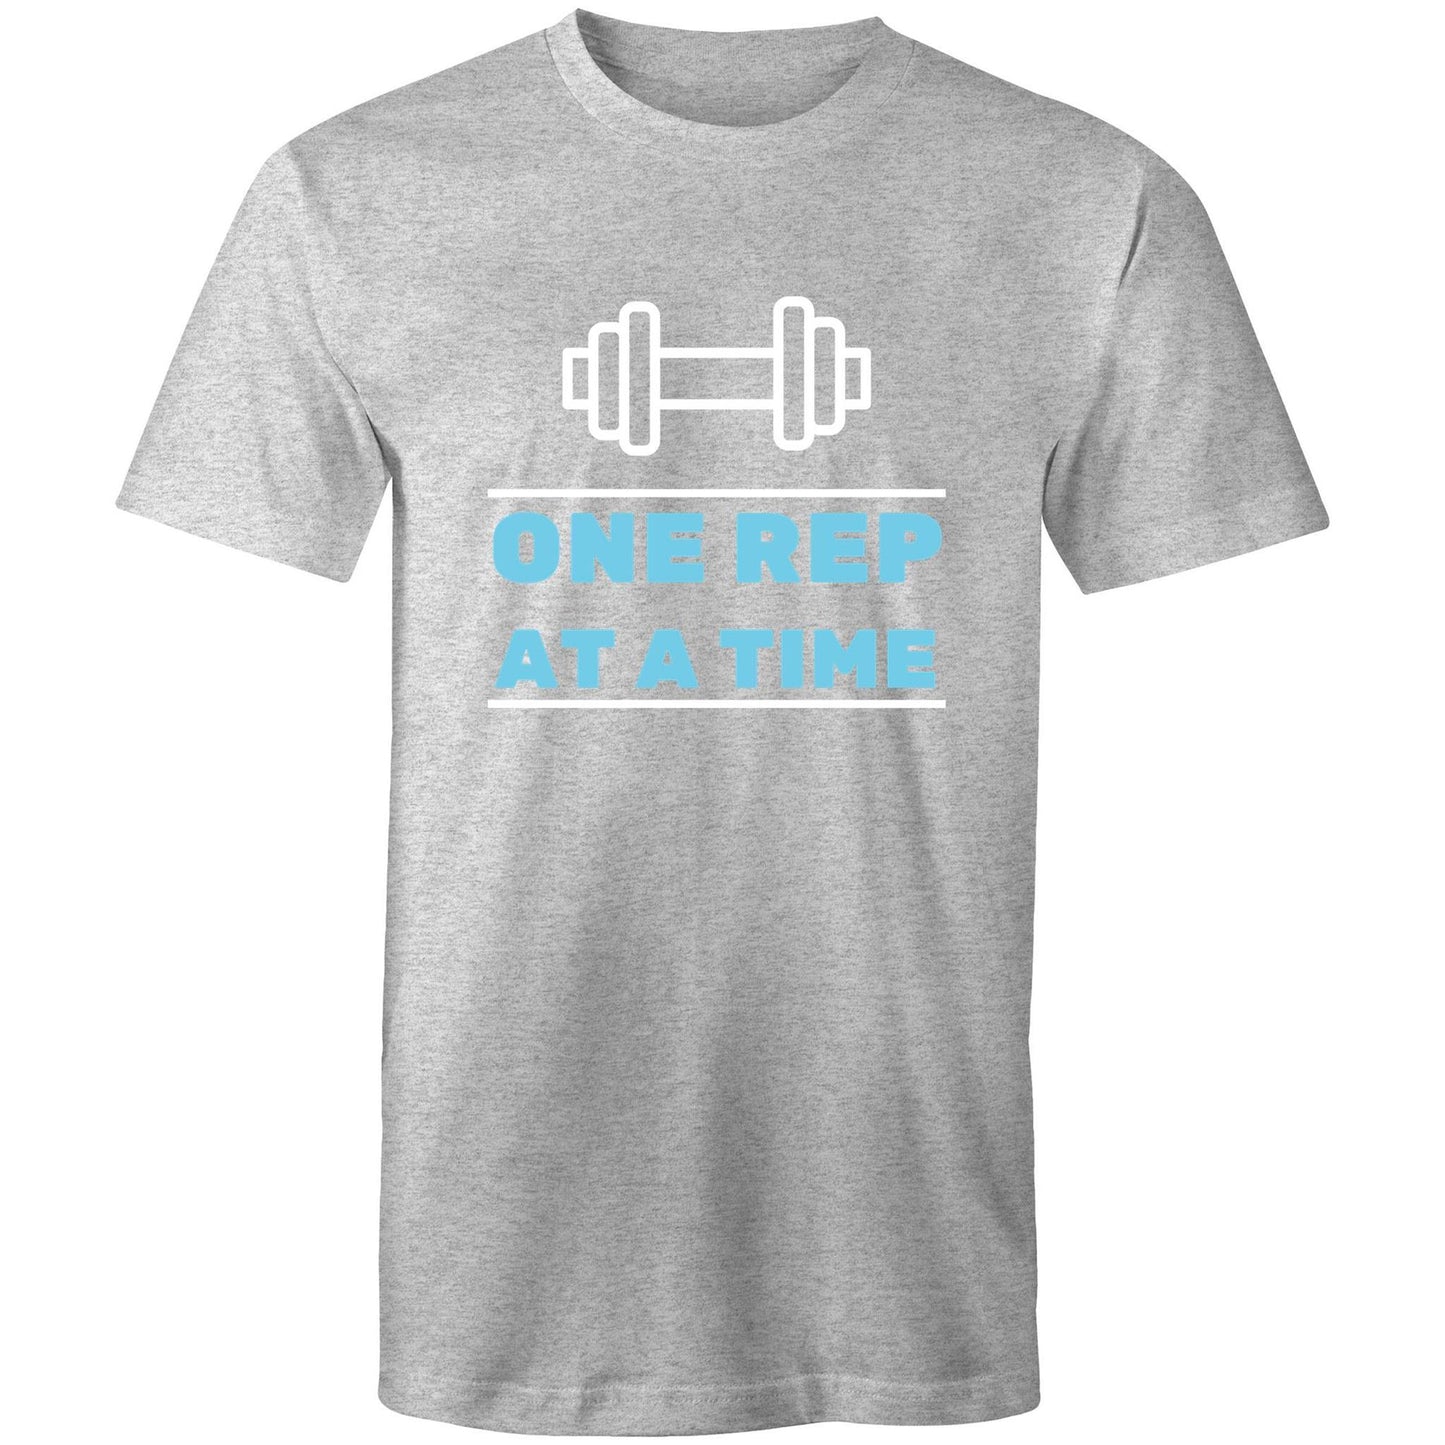 One Rep At A Time - Short Sleeve T-shirt Grey Marle Fitness T-shirt Fitness Mens Womens